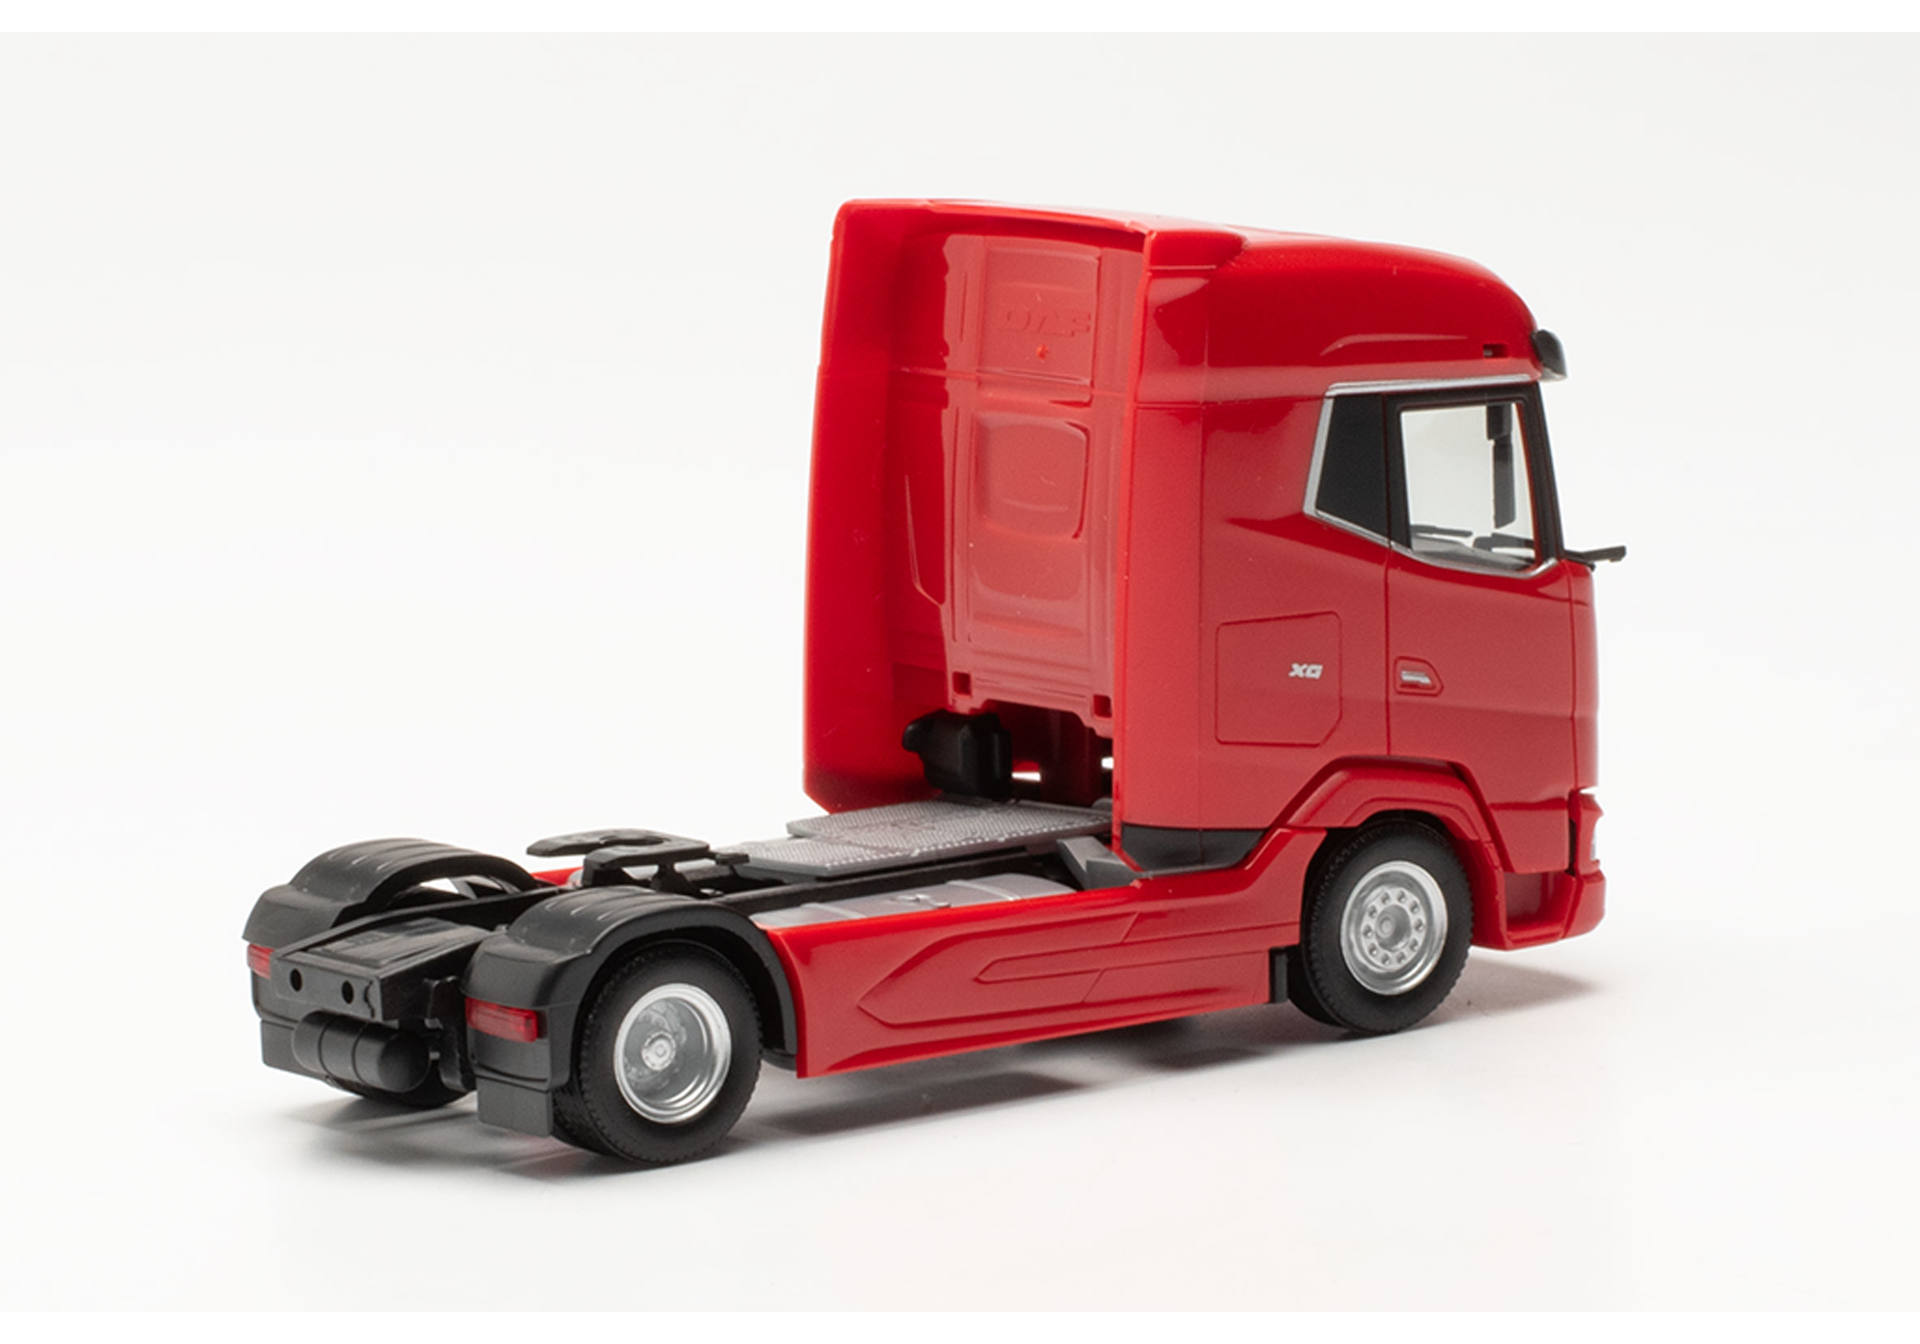 DAF XG tractor, red